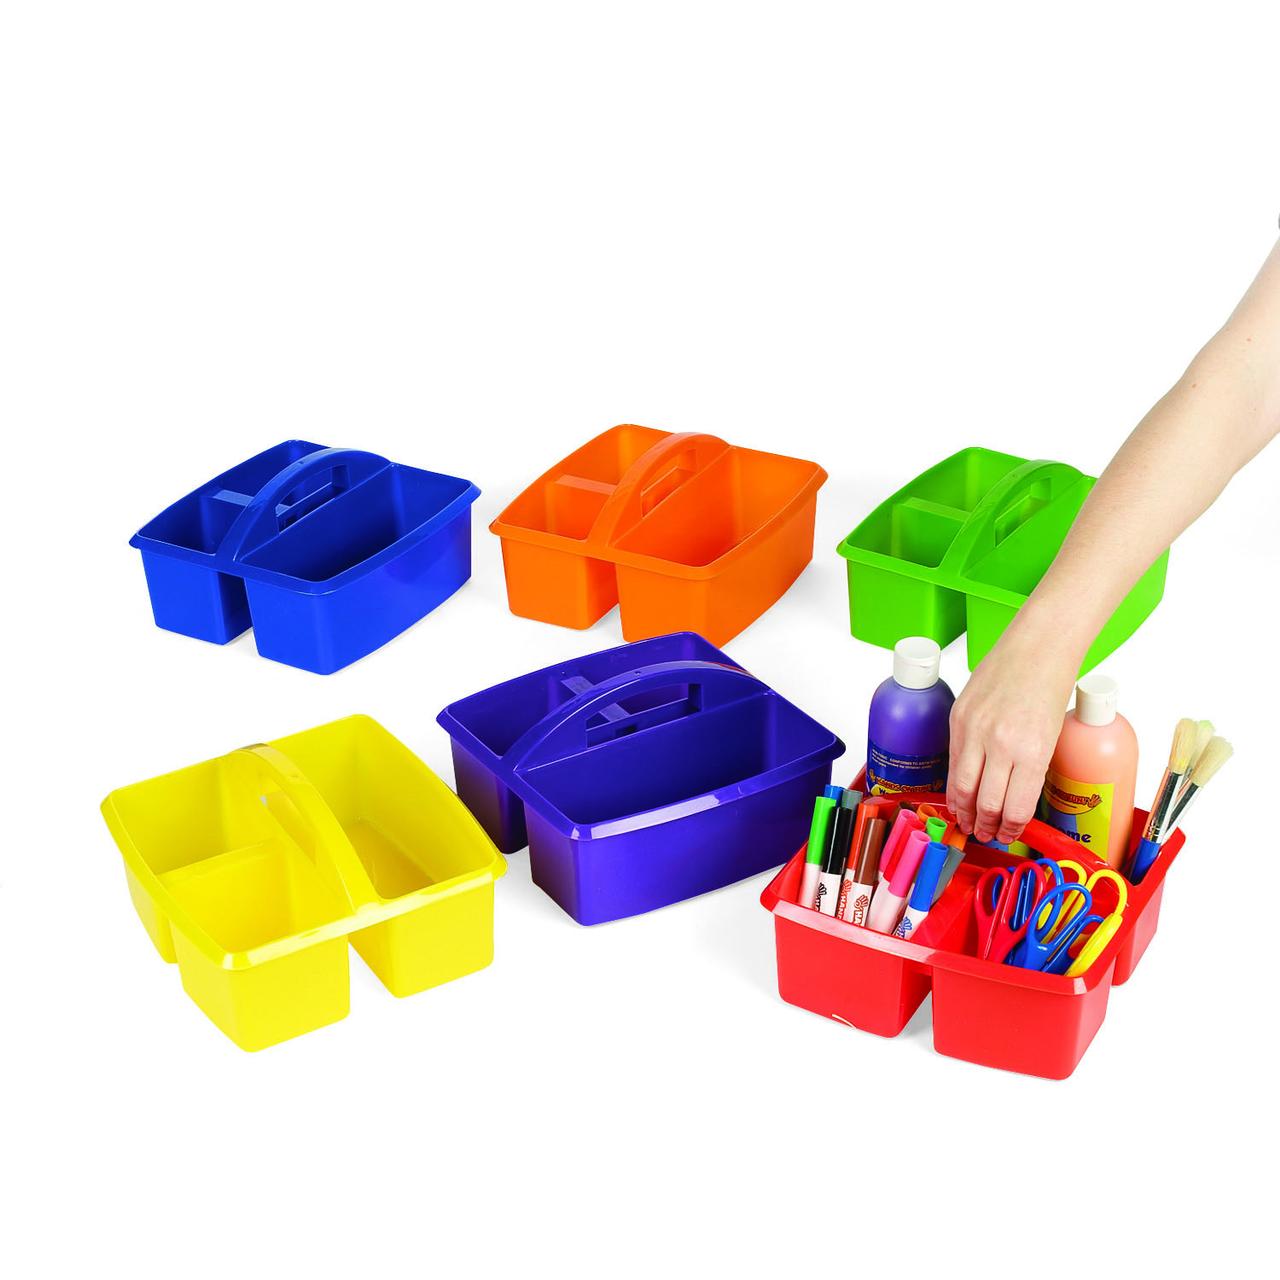 Classroom Storage Caddy W/ 3 Compartment - Educational - 6 Pieces - image 1 of 3